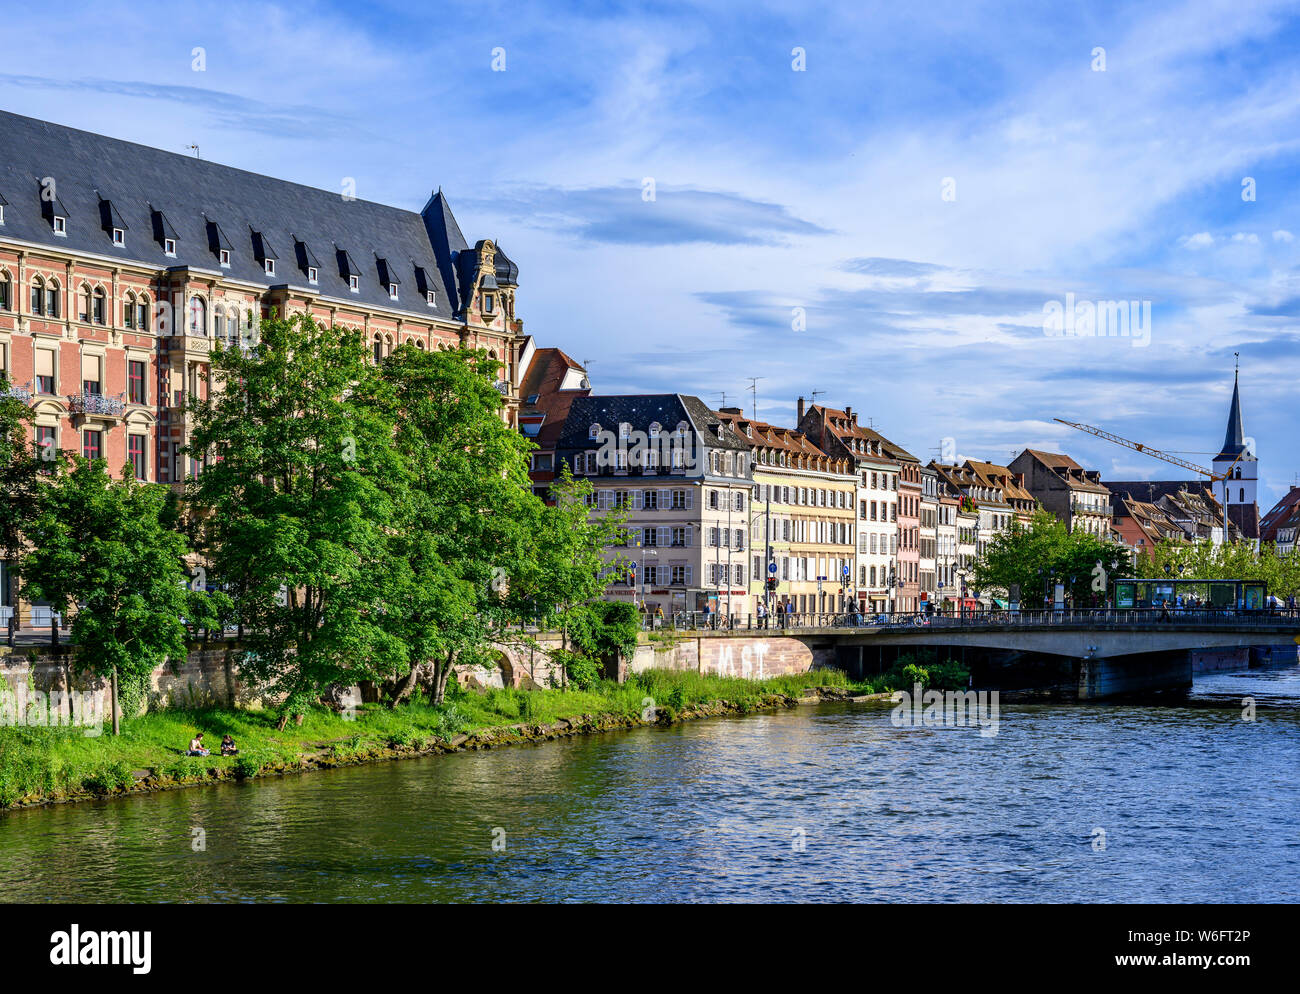 Gallia building, student residence, dorm accomodation, Ill river, waterfront houses perspective, Strasbourg, Alsace, France, Europe, Stock Photo